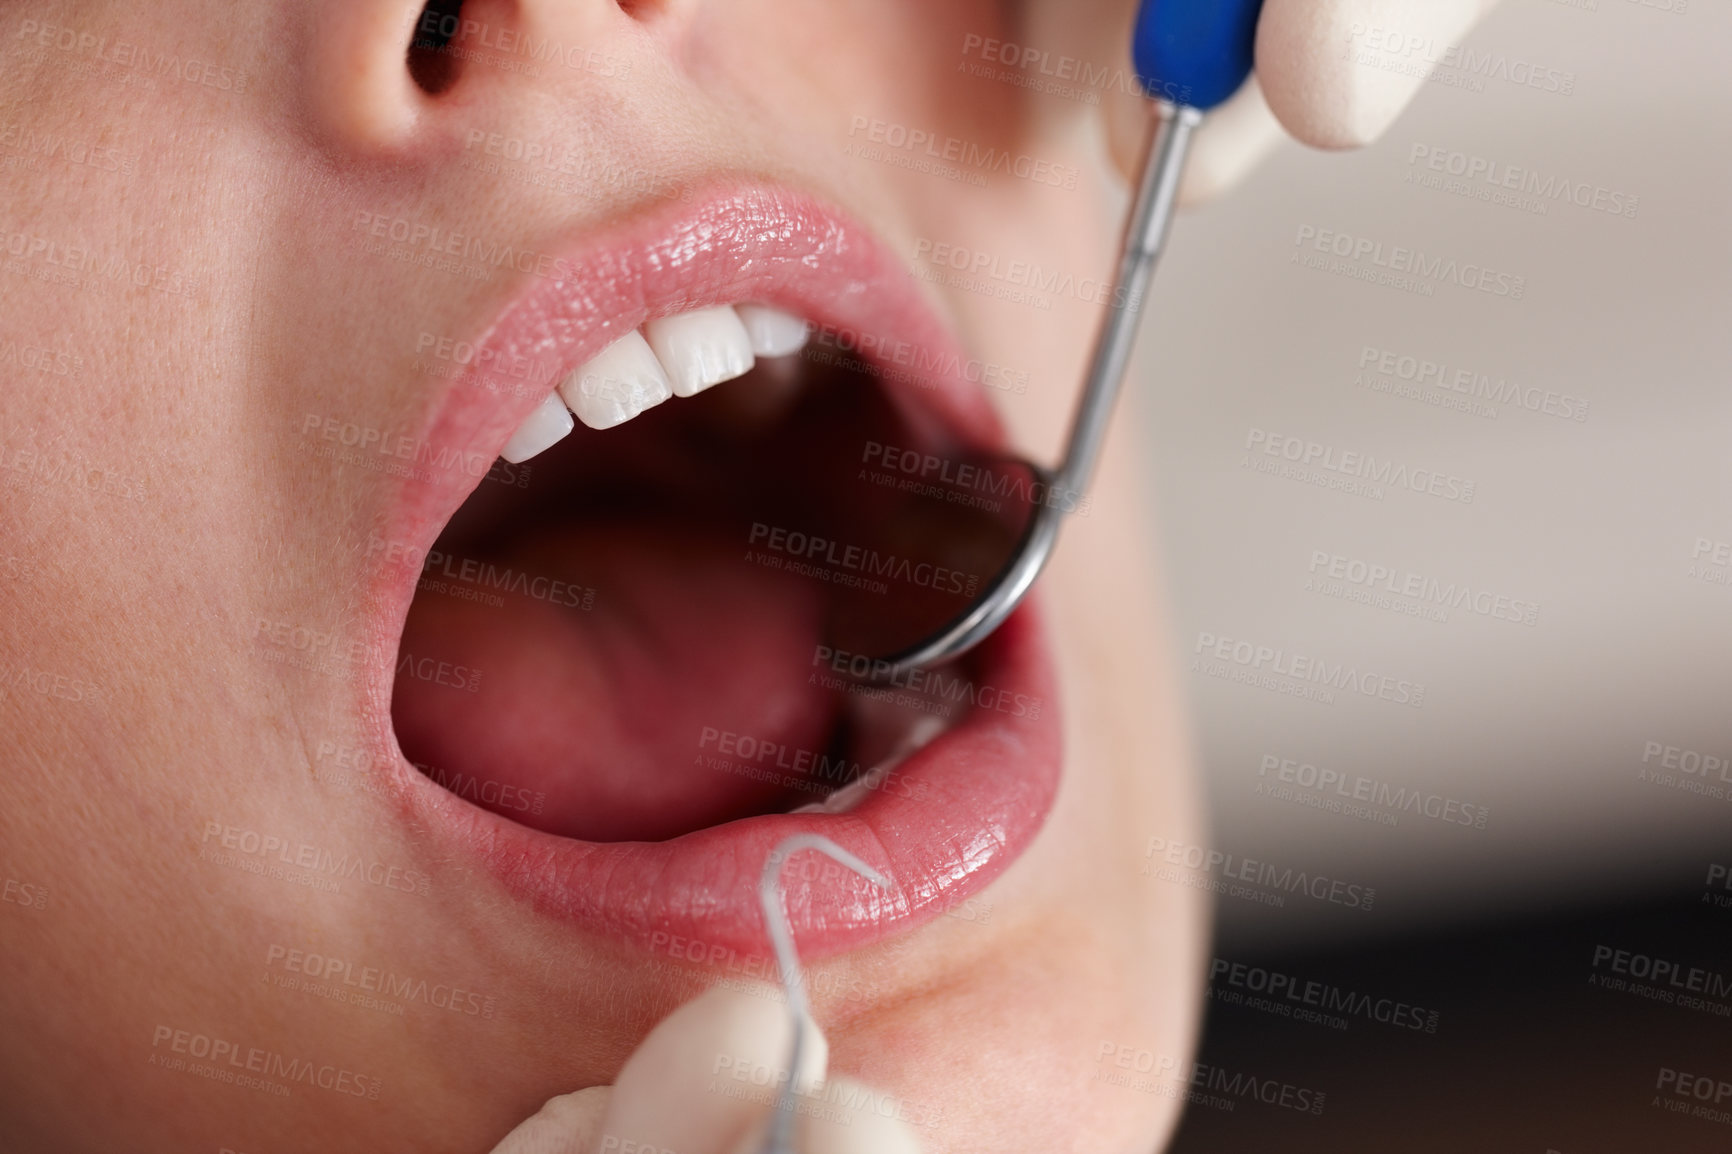 Buy stock photo Closeup of female patient during dental treatment